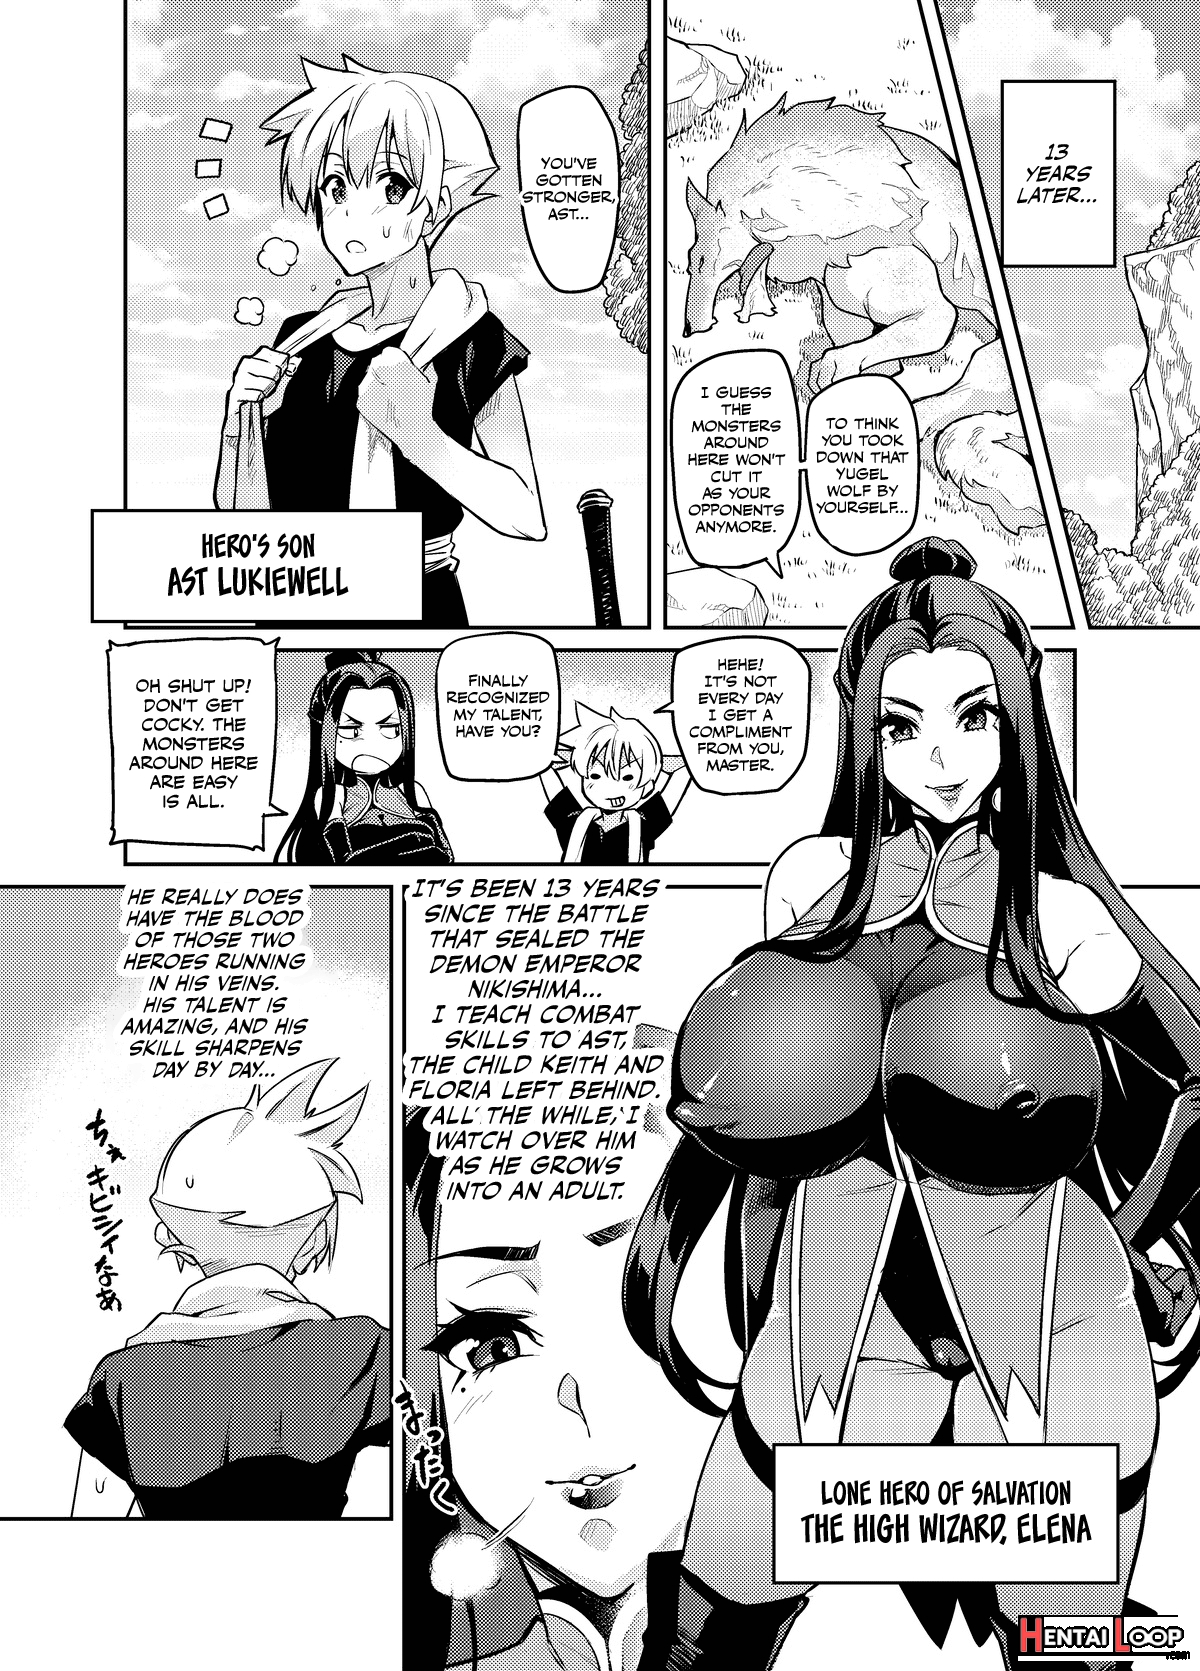 High Wizard Elena ~the Witch Who Fell In Love With The Child Entrusted To Her By Her Past Sweetheart~ Chapter 1, 3-5 page 4